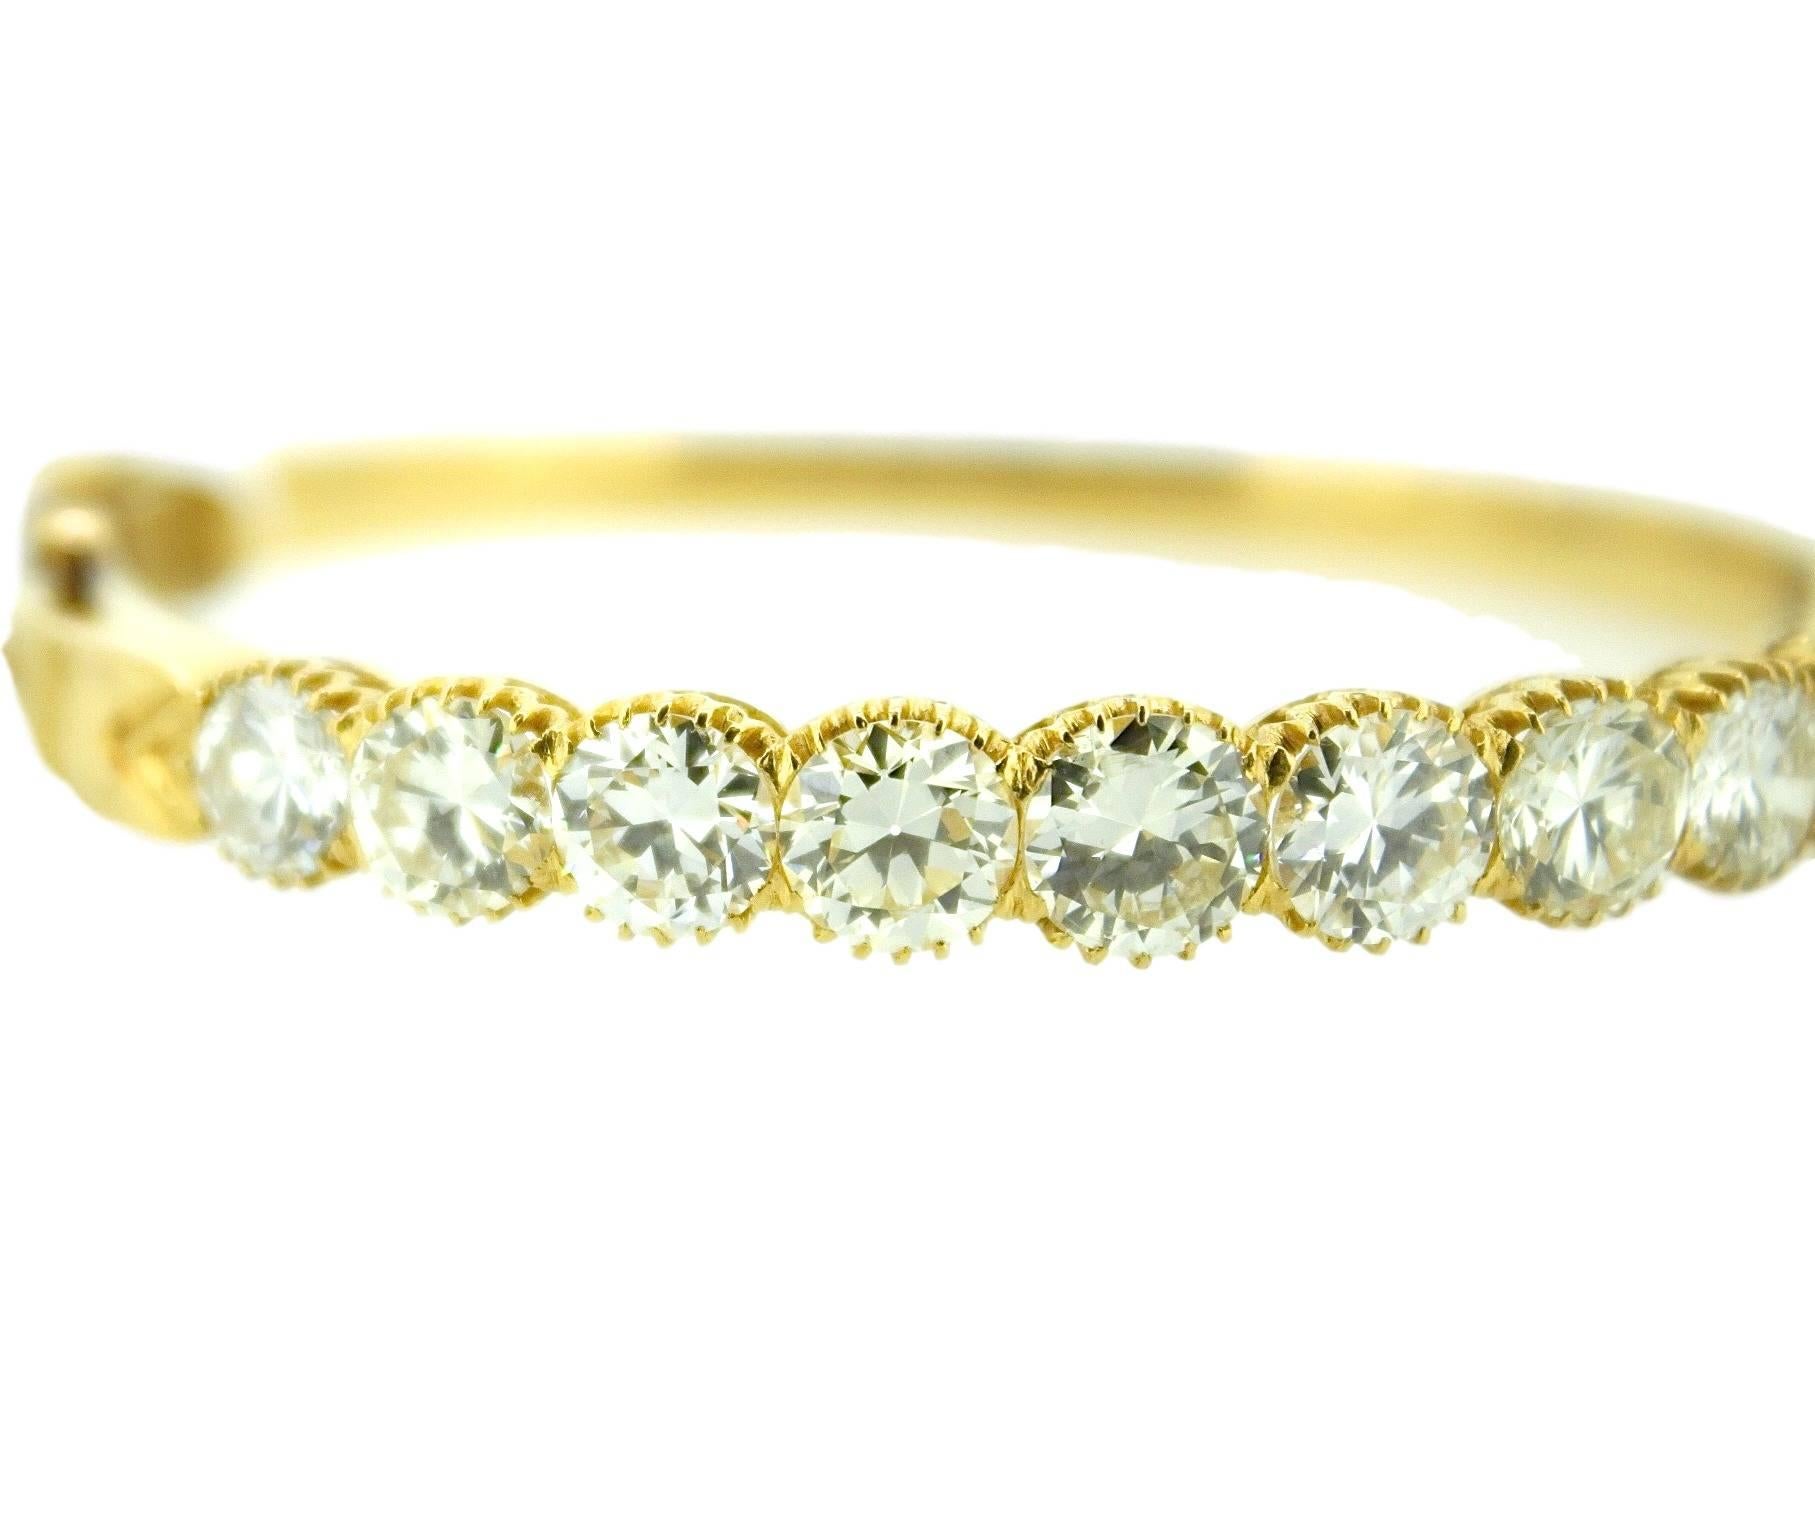 A bracelet like you have never seen before!
The 18K yellow golden bracelet has over 9 carat diamonds in grand total, the quality is VVS and color J making the diamonds almost flawless! 
The bracelet is timeless and will looks amazing, its unique.